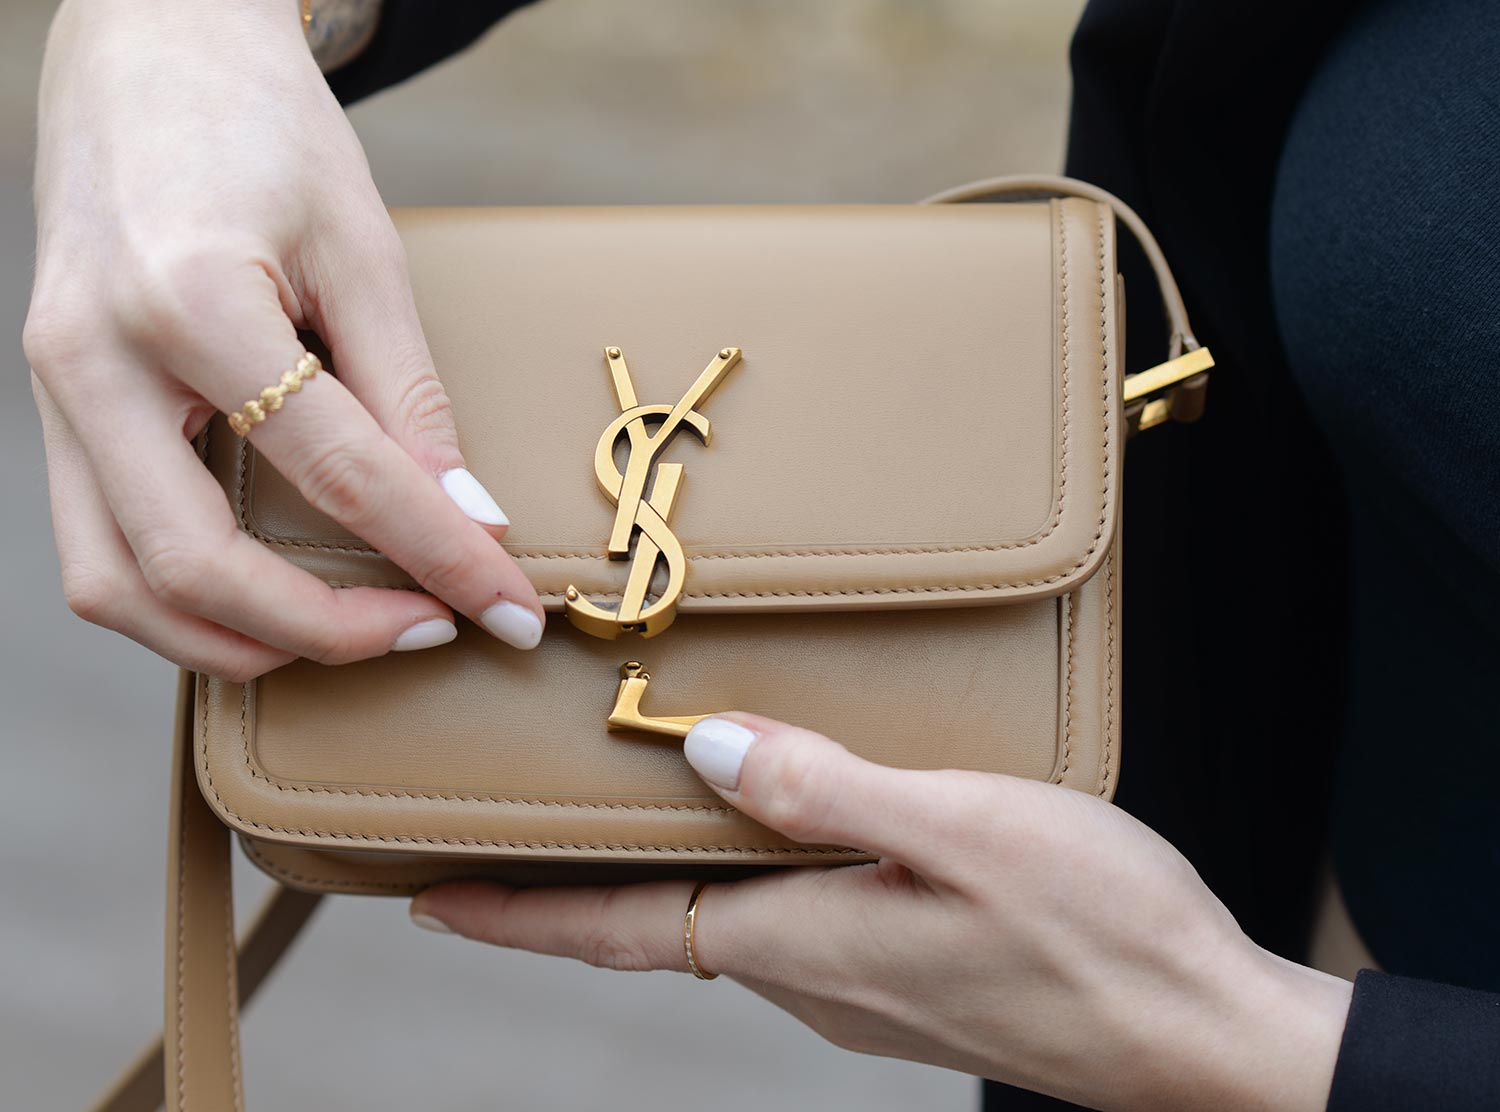 YSL pouch/ Saint Laurent clutch review. What fits inside? The one